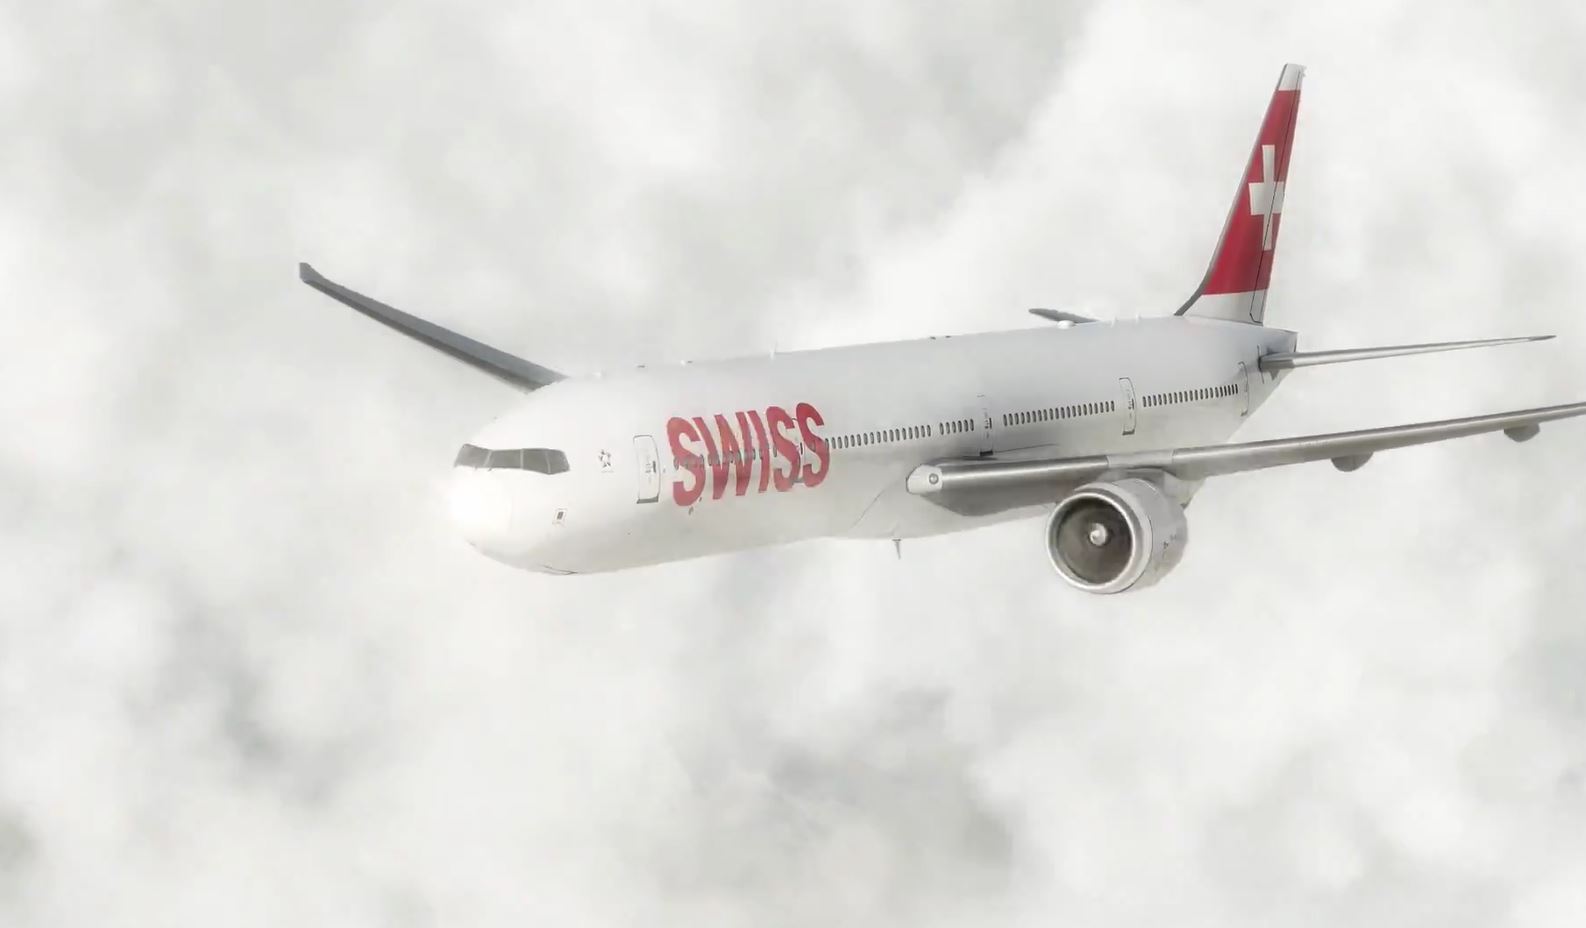 SWISS will renewing its long-haul aircraft fleet with Boeing 777